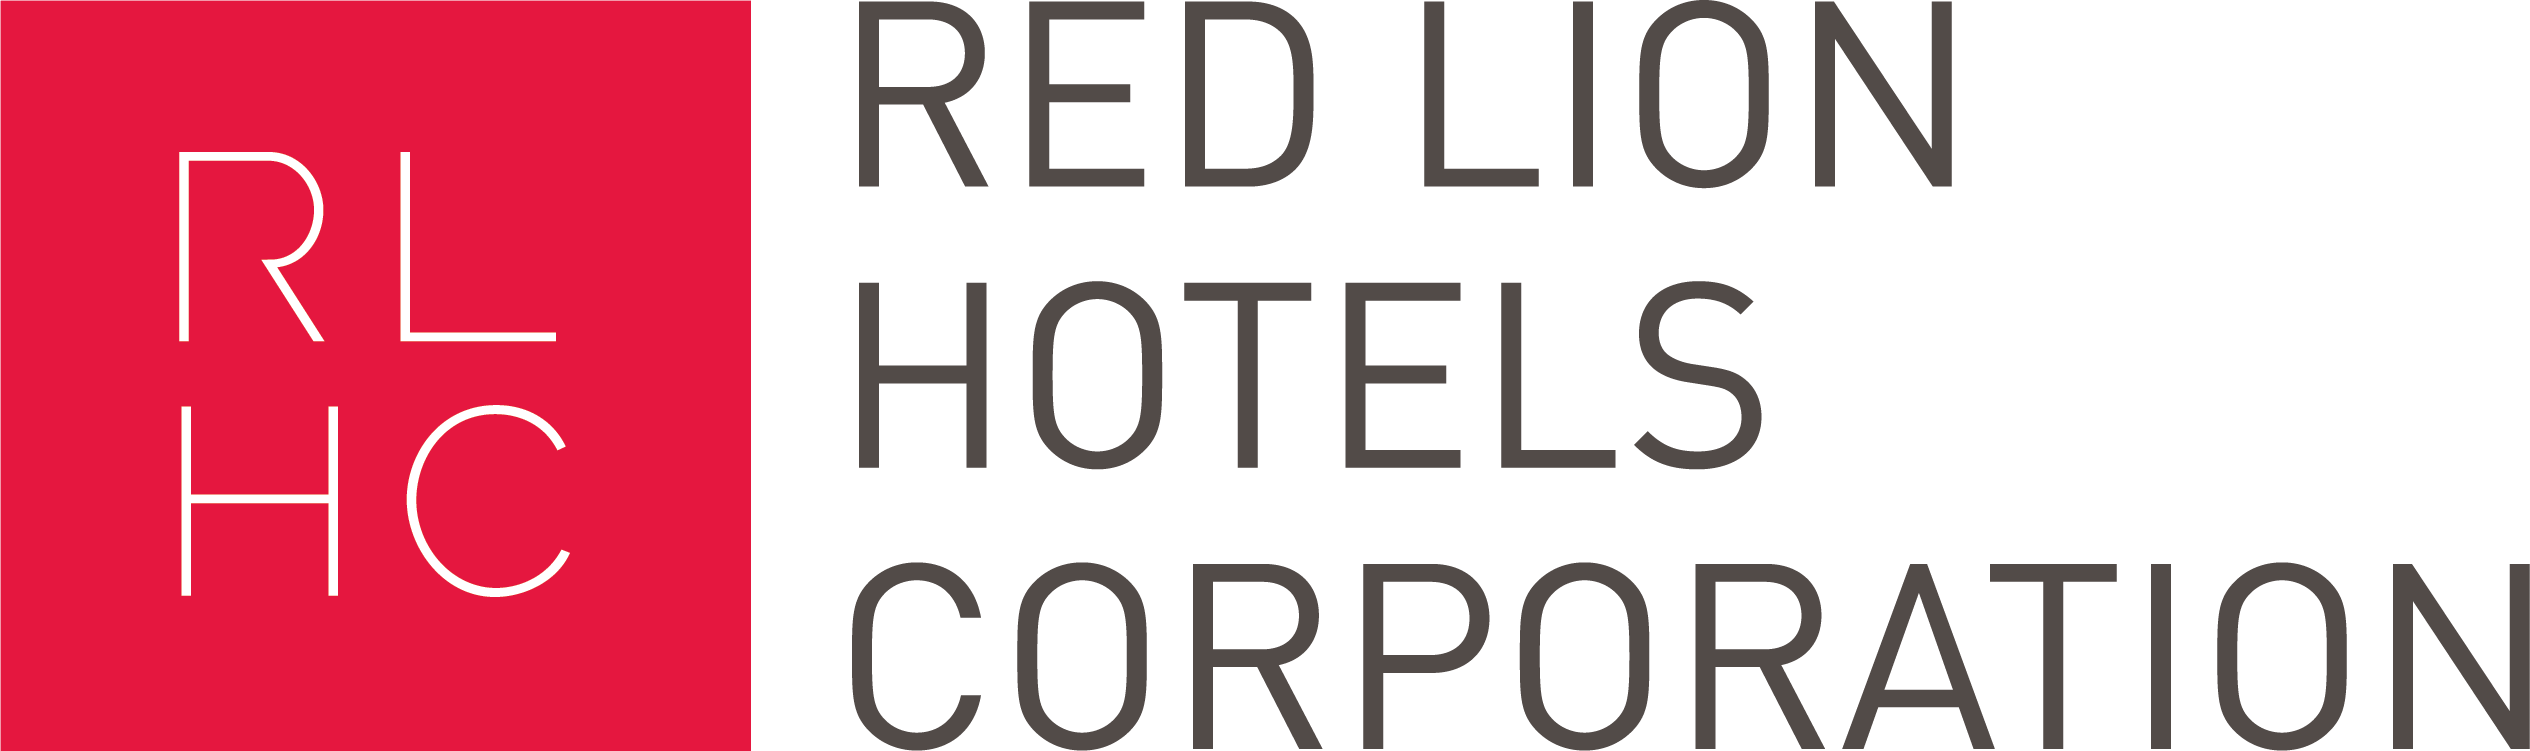 Red Lion Hotel Logo - Red Lion Hotels Corp logo - No Vacancy